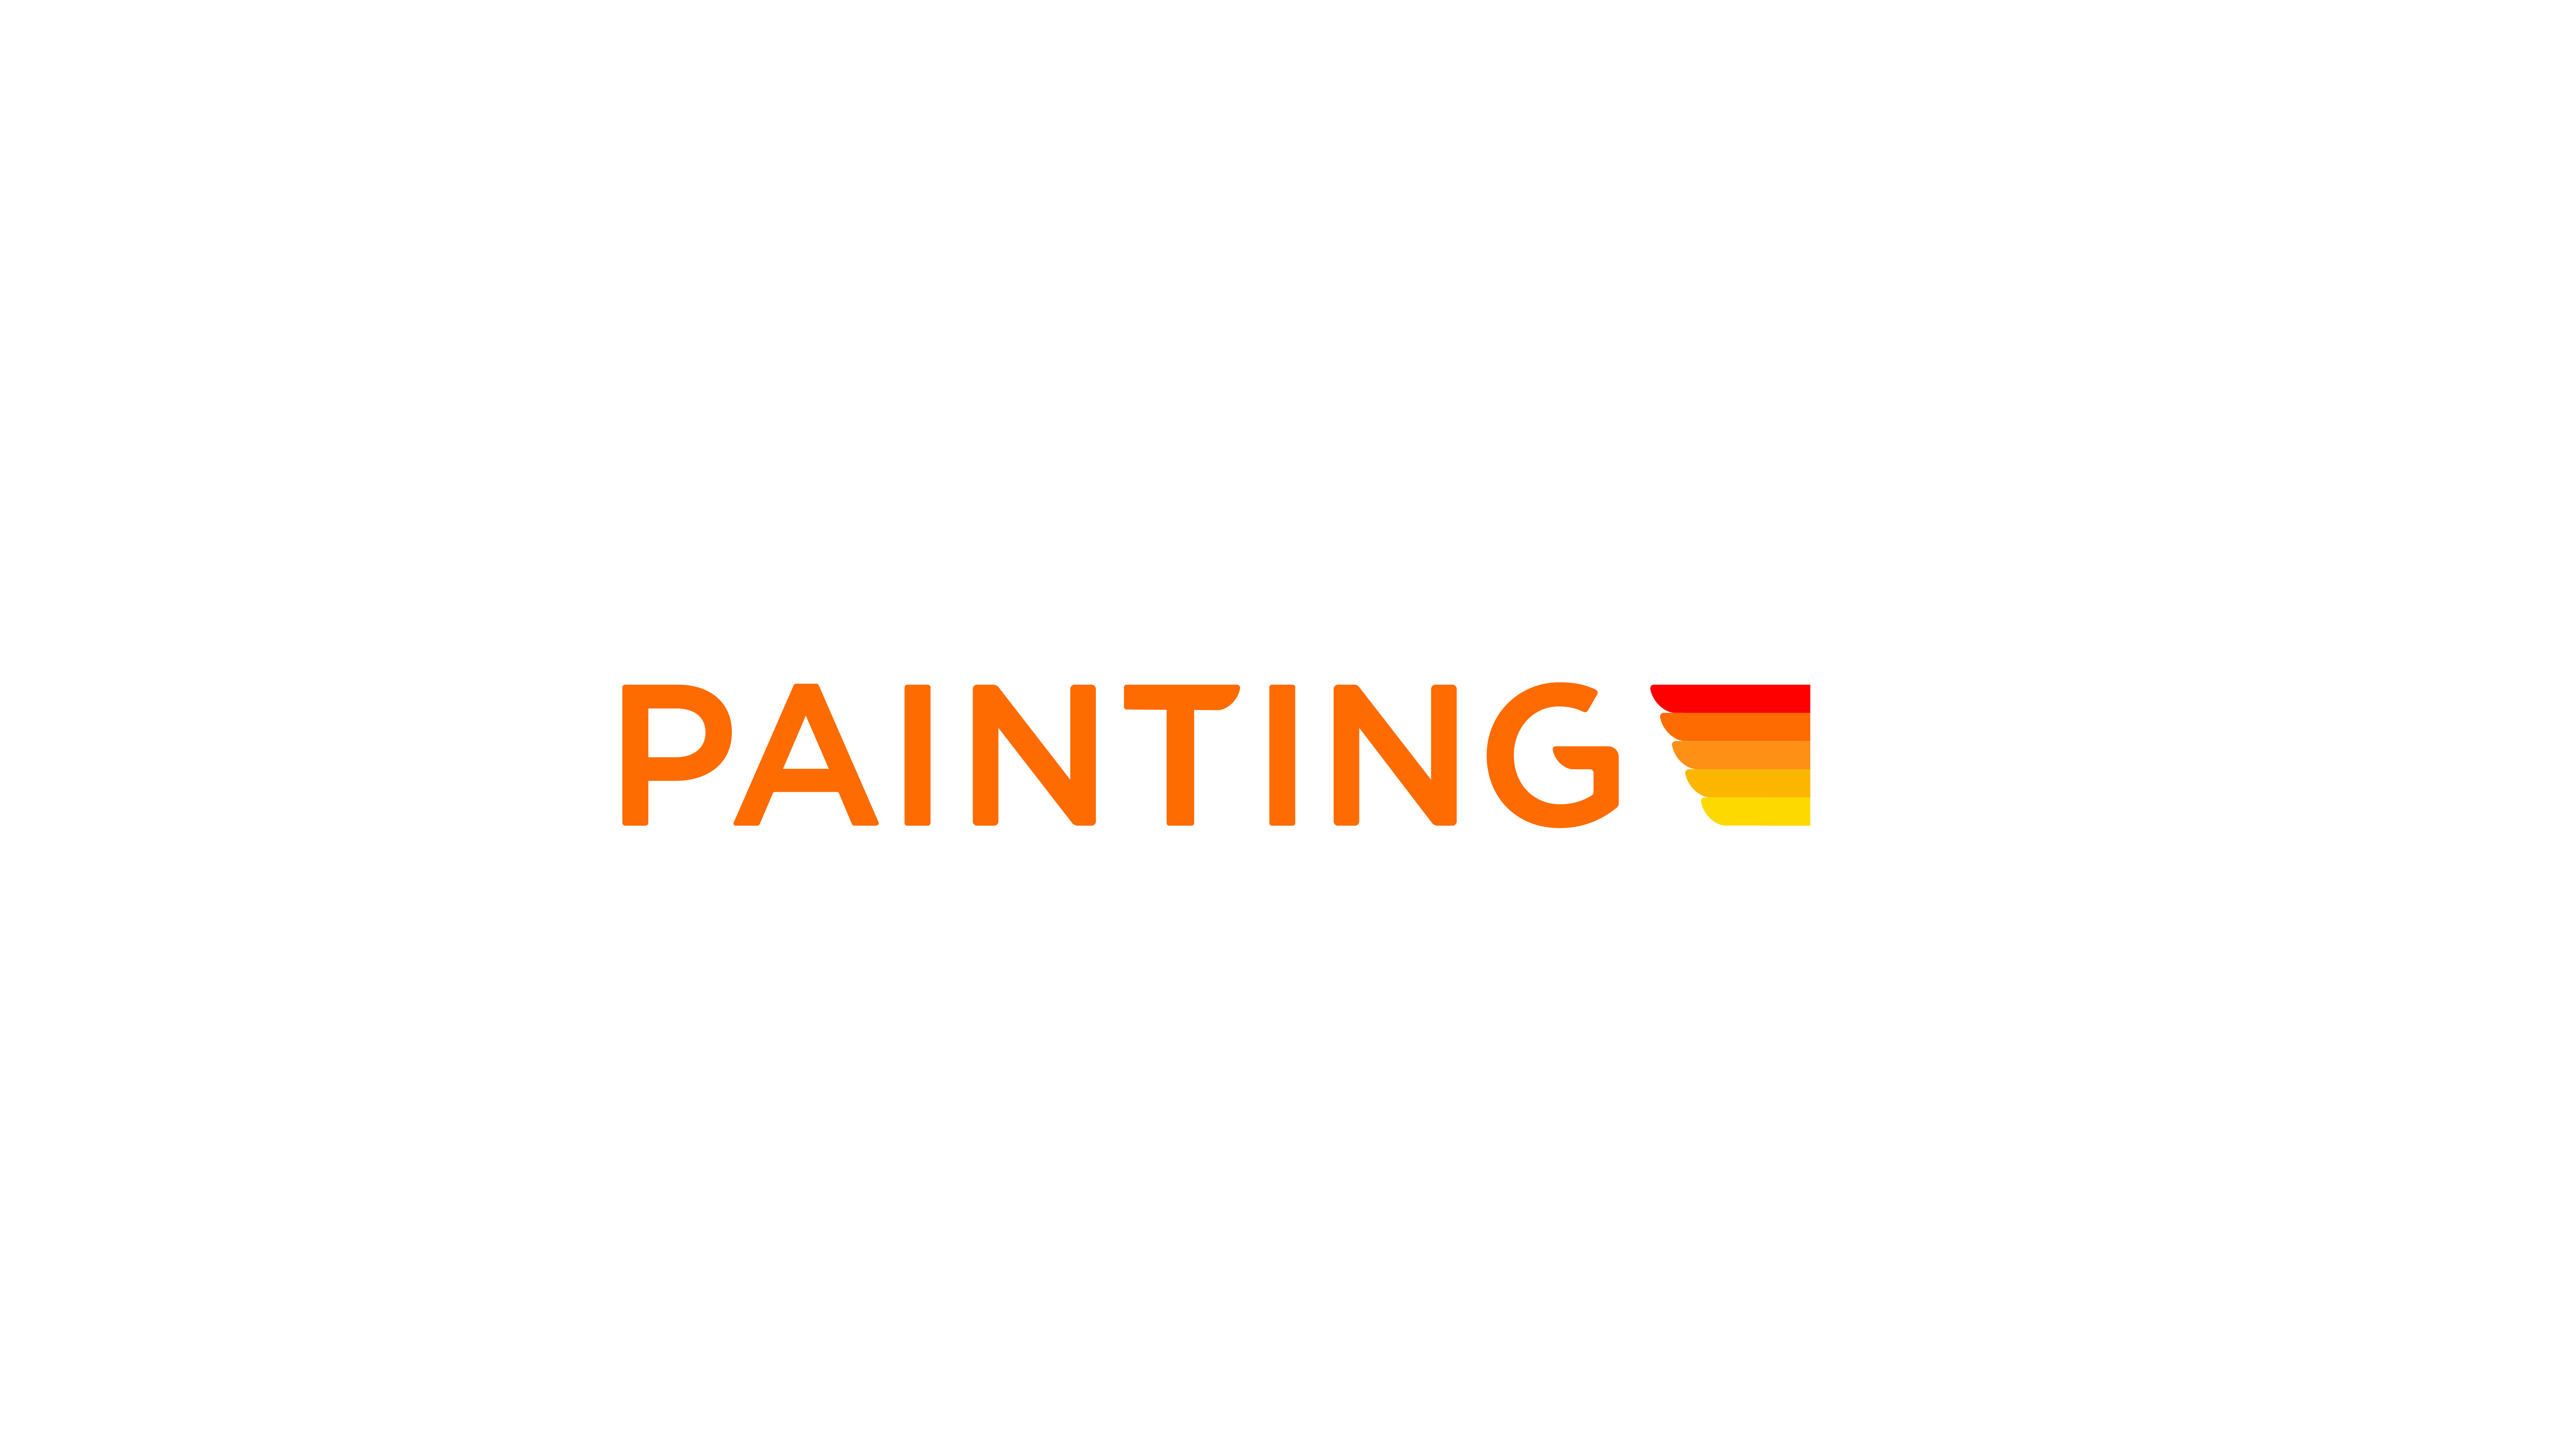 Five Star Painting of Hamilton, ON